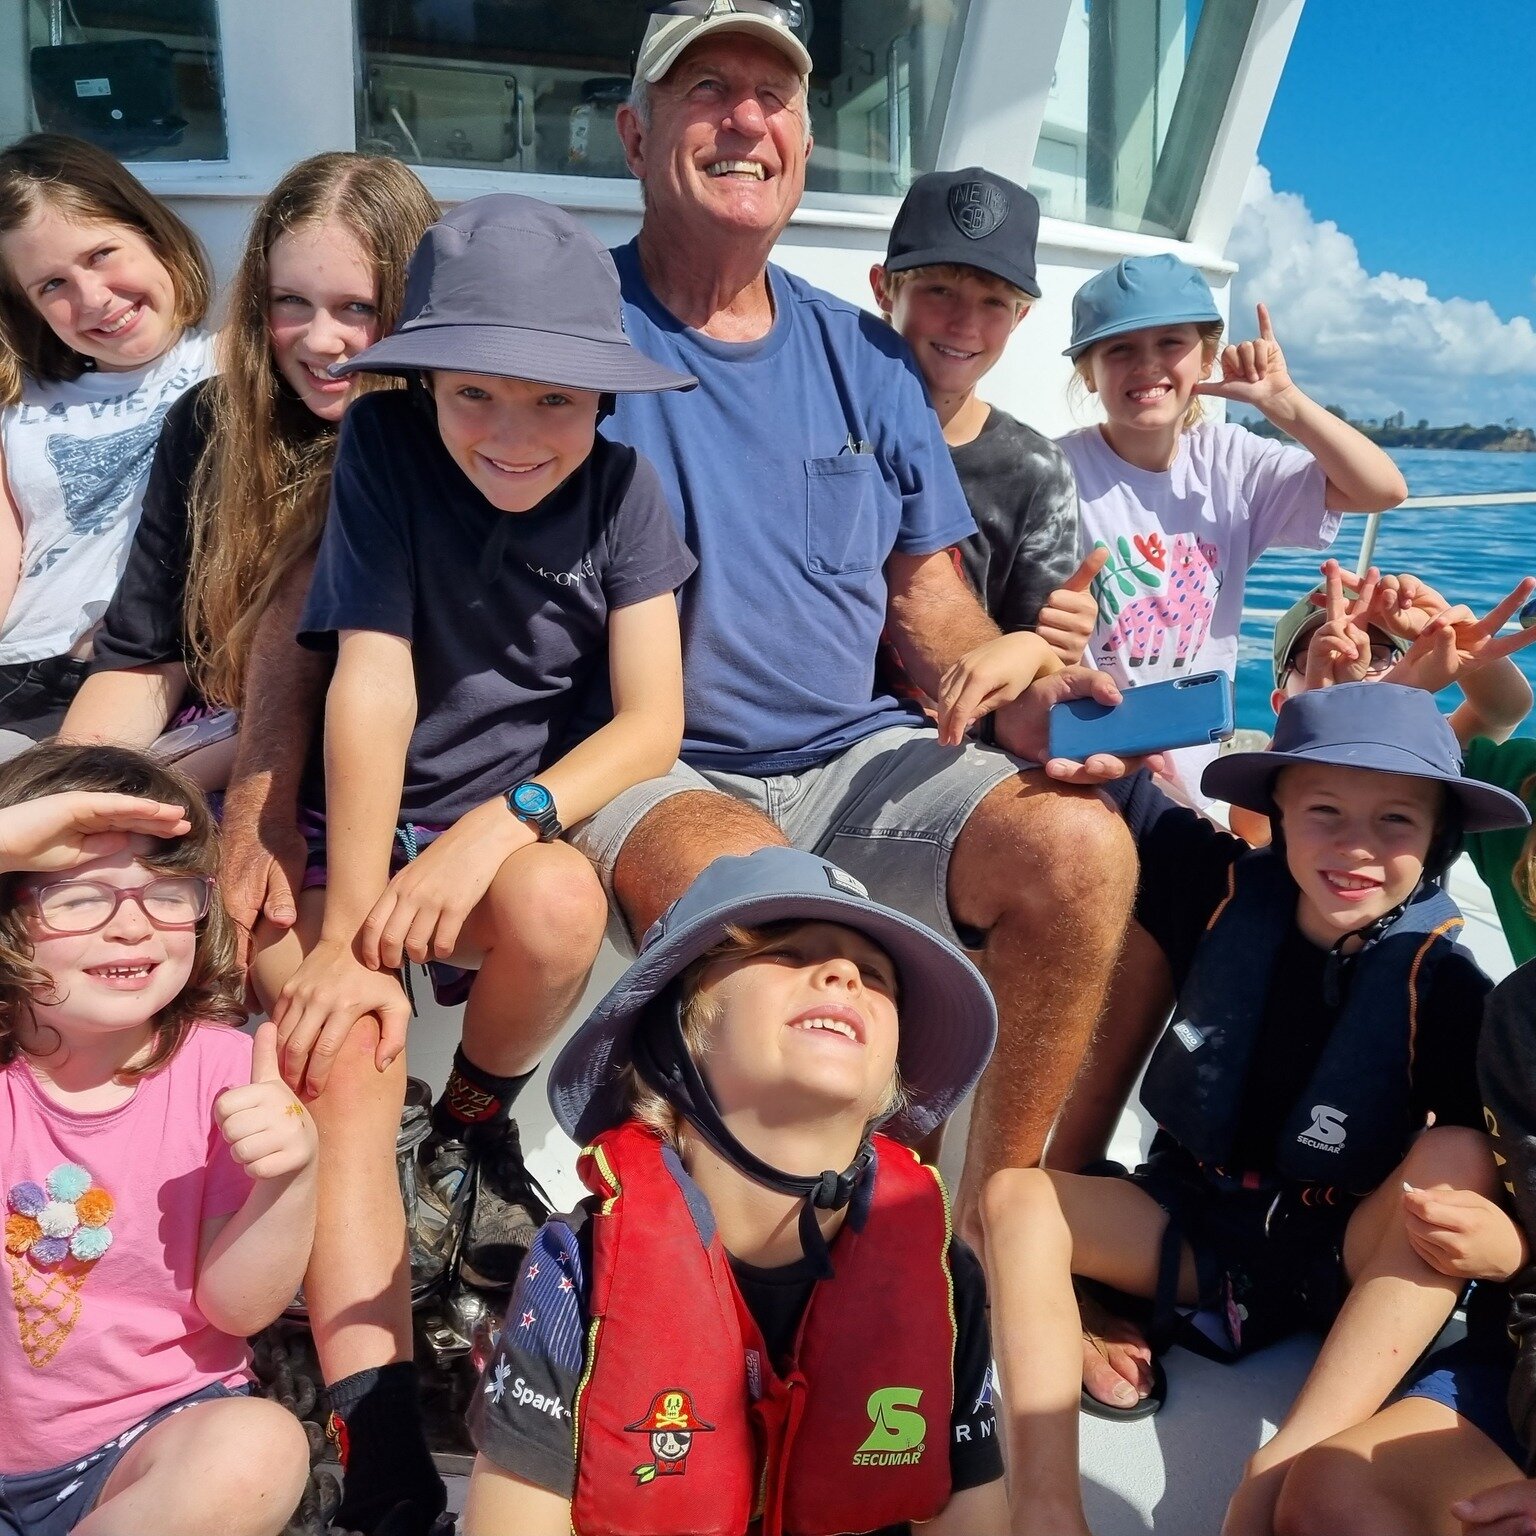 Such a pleasure having kids on board our charters, their enthusiasm and excitement is infectious. Hats off to all parents that find the time to get their kids out on the water one way or another 🙌

Give us a bell to talk through the options we can p